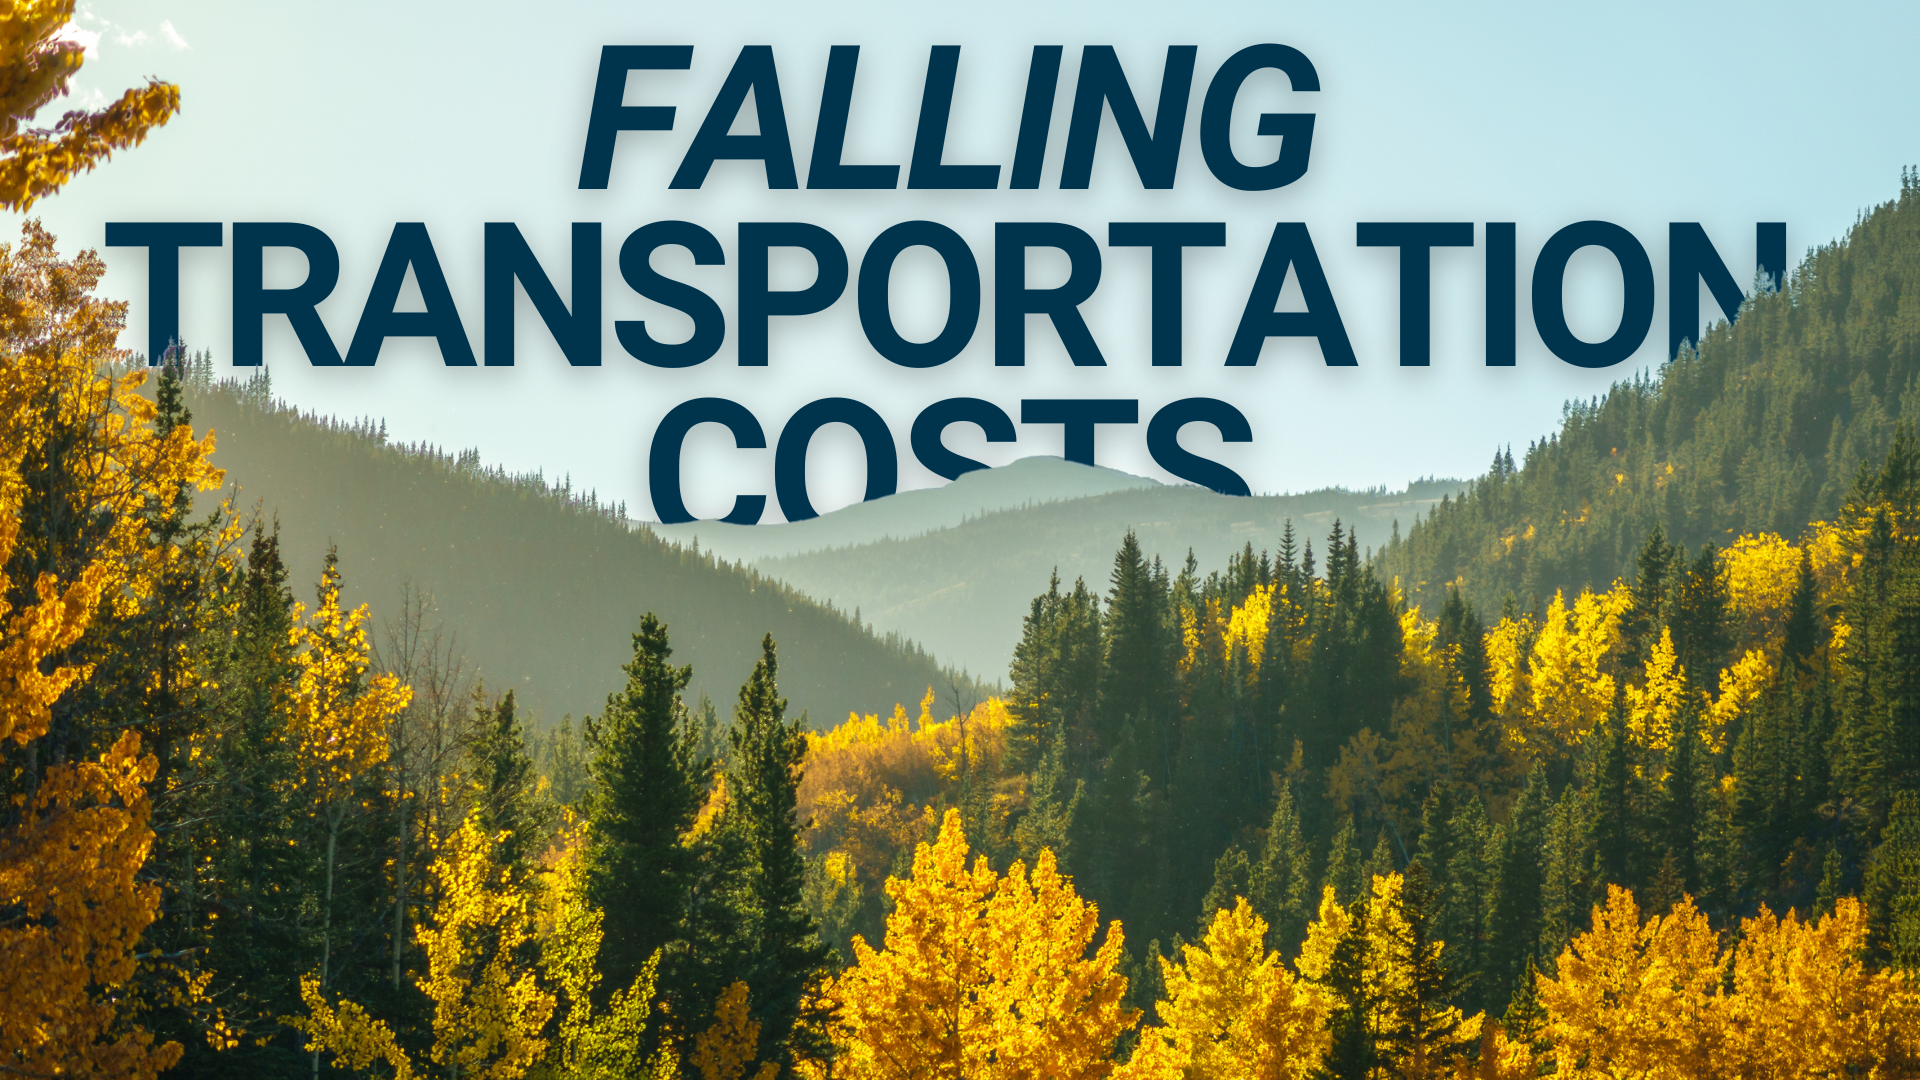 Illustrated forest with "Falling Transportation Costs" title in the background